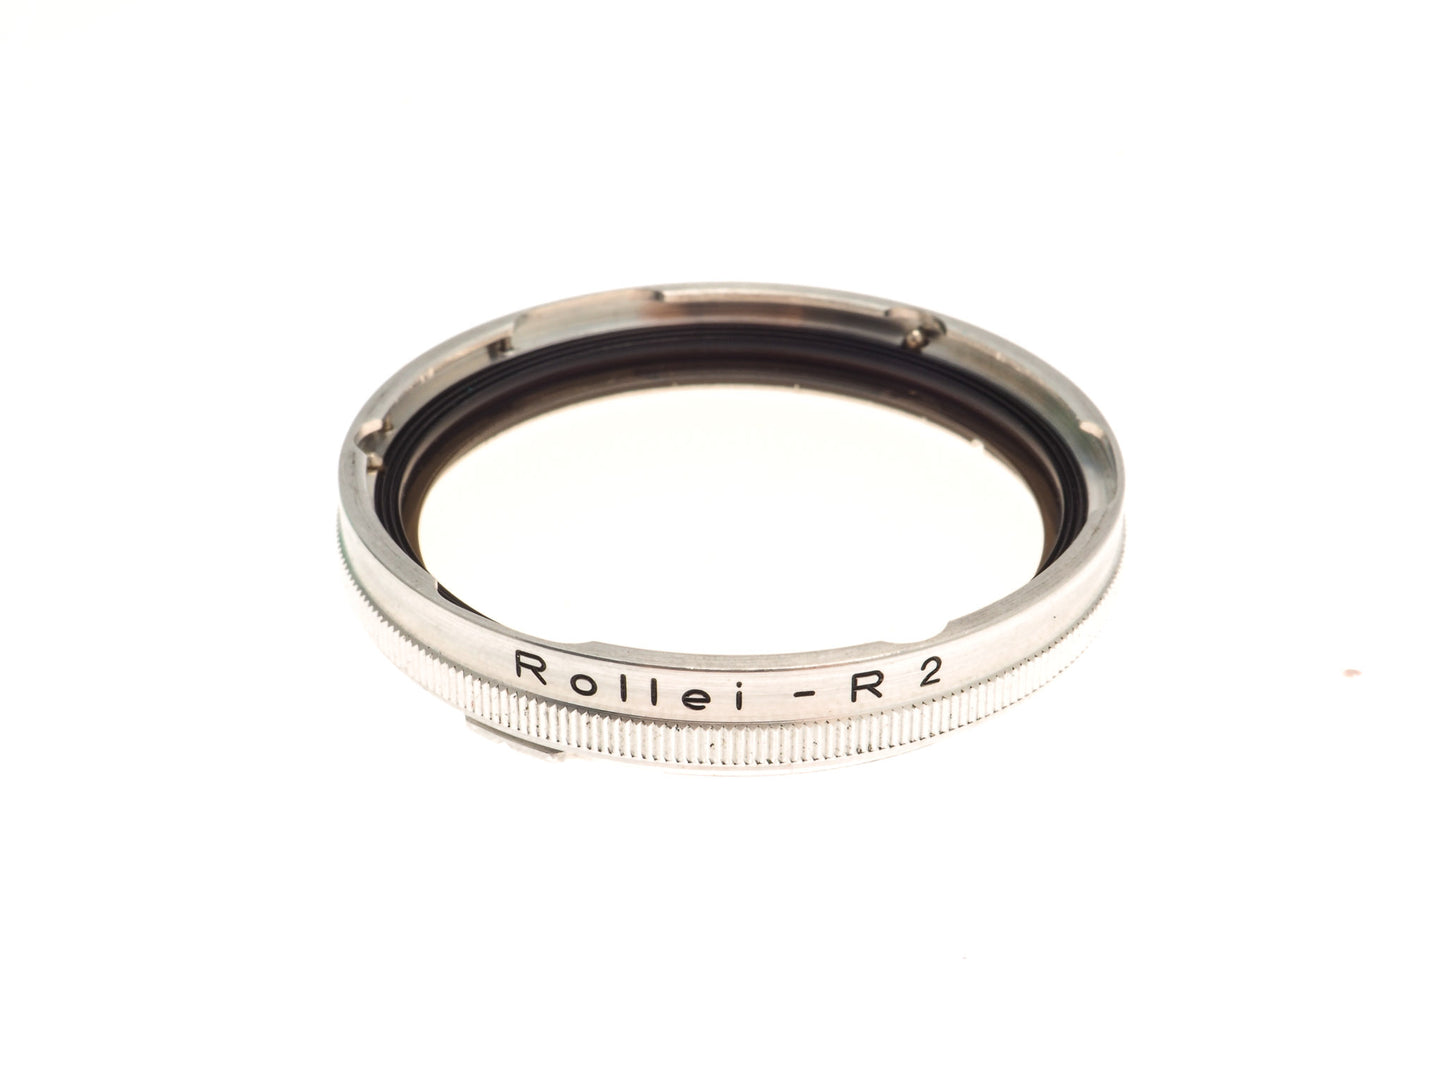 Rollei Bay III Color Correction Filter R-2 - Accessory